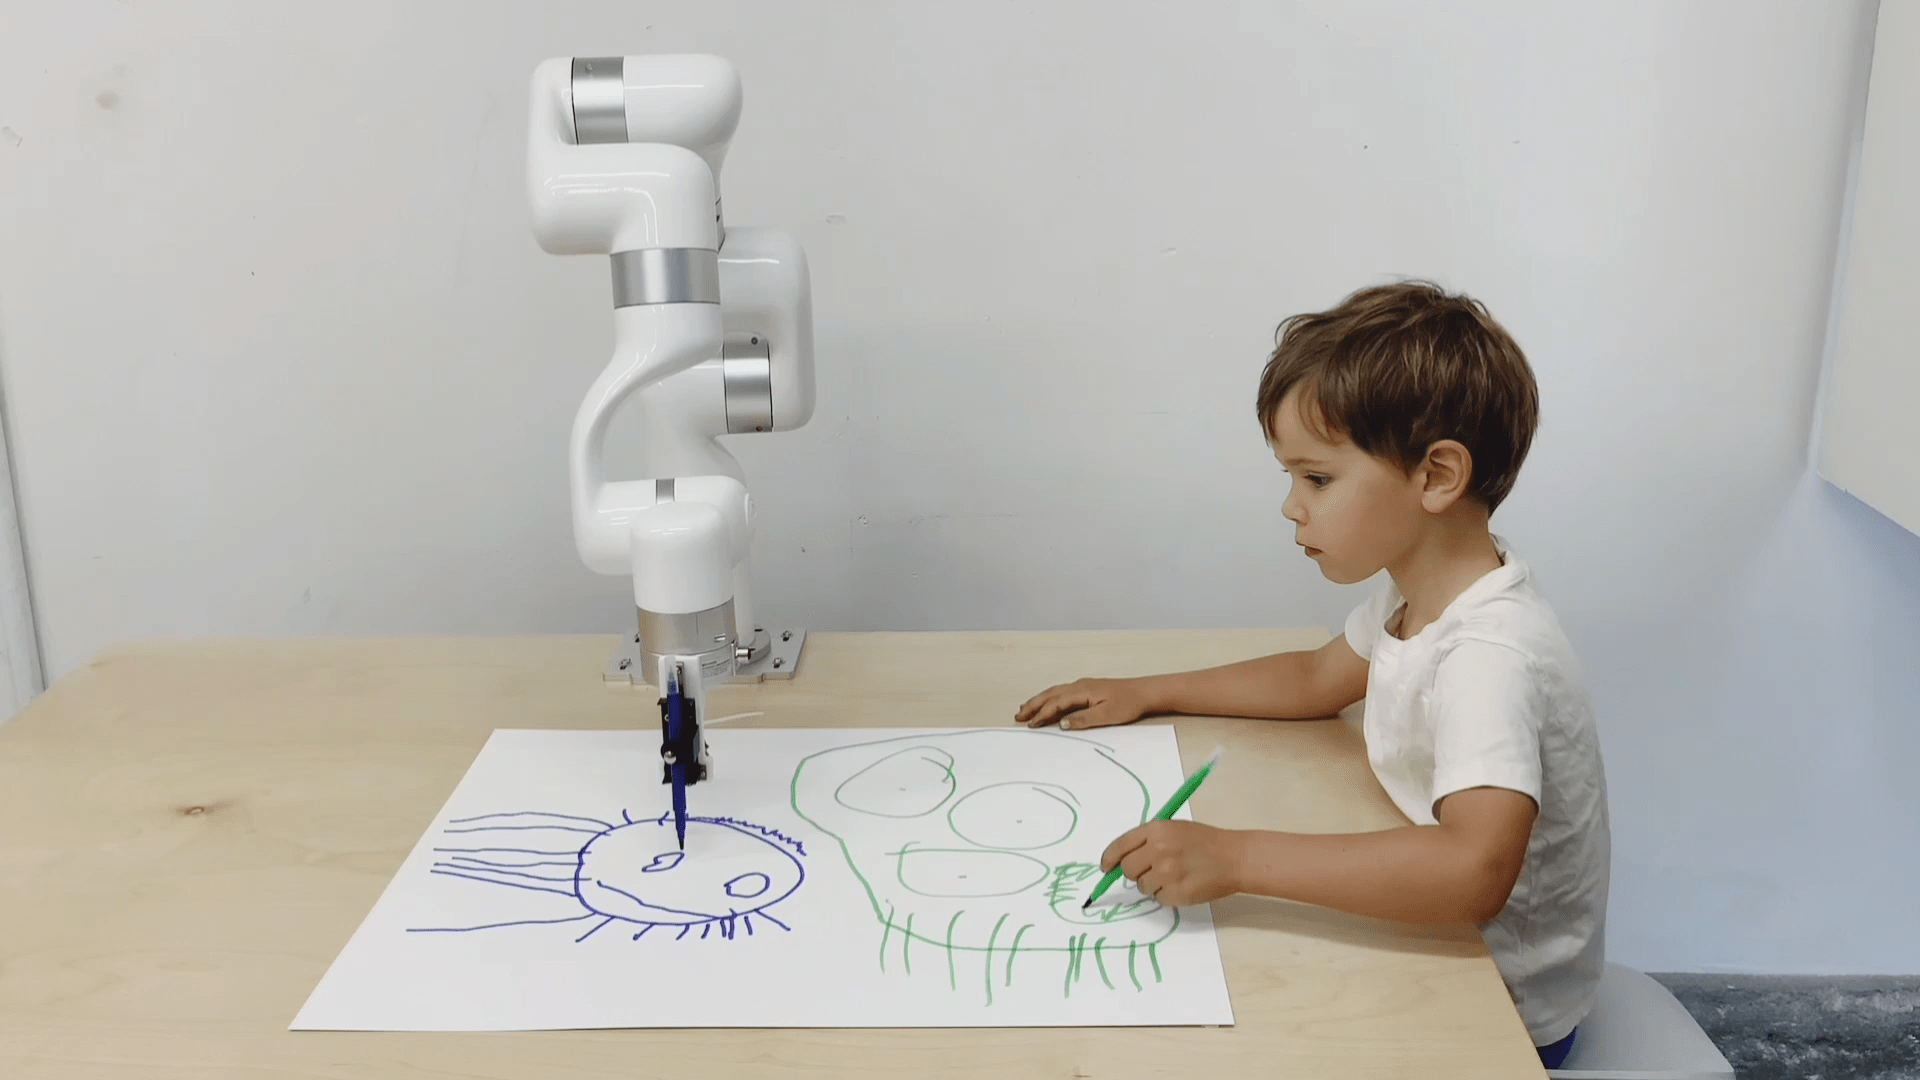 bot and child completing a drawing transfer. Courtesy photo.